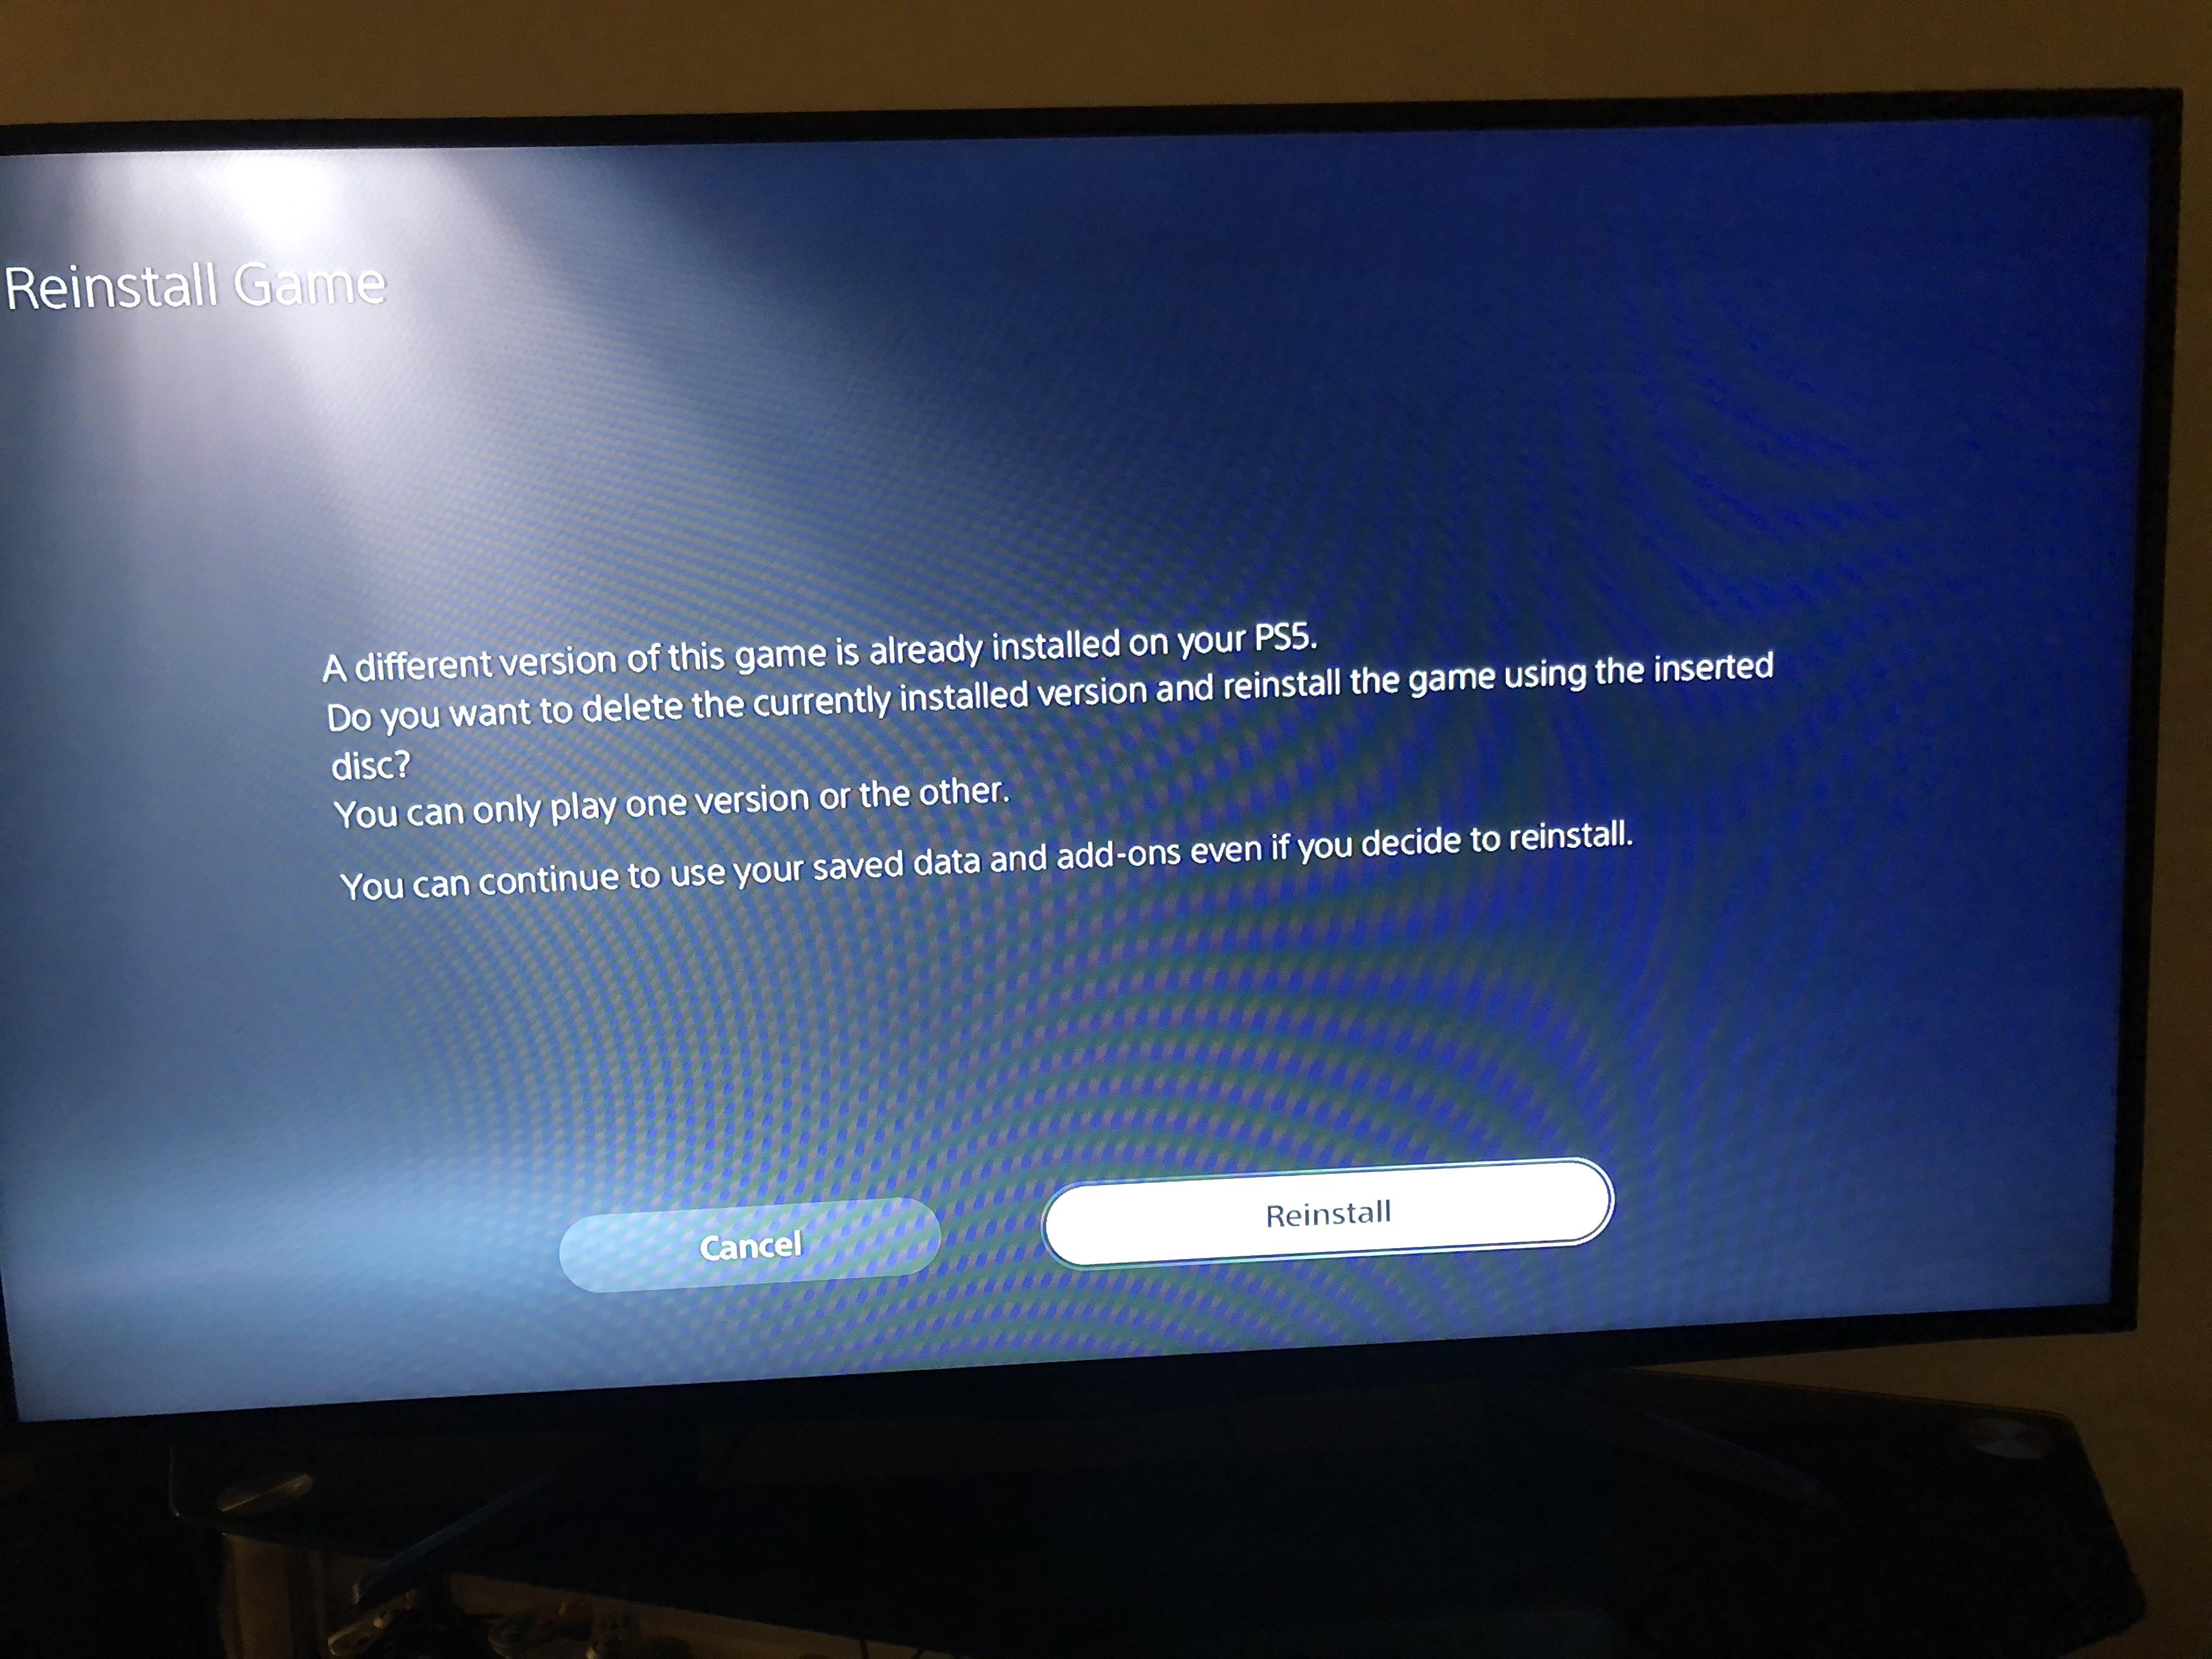 Insert the game disc or redownload the game from the PlayStation Store.
Follow the on-screen prompts to reinstall the game.